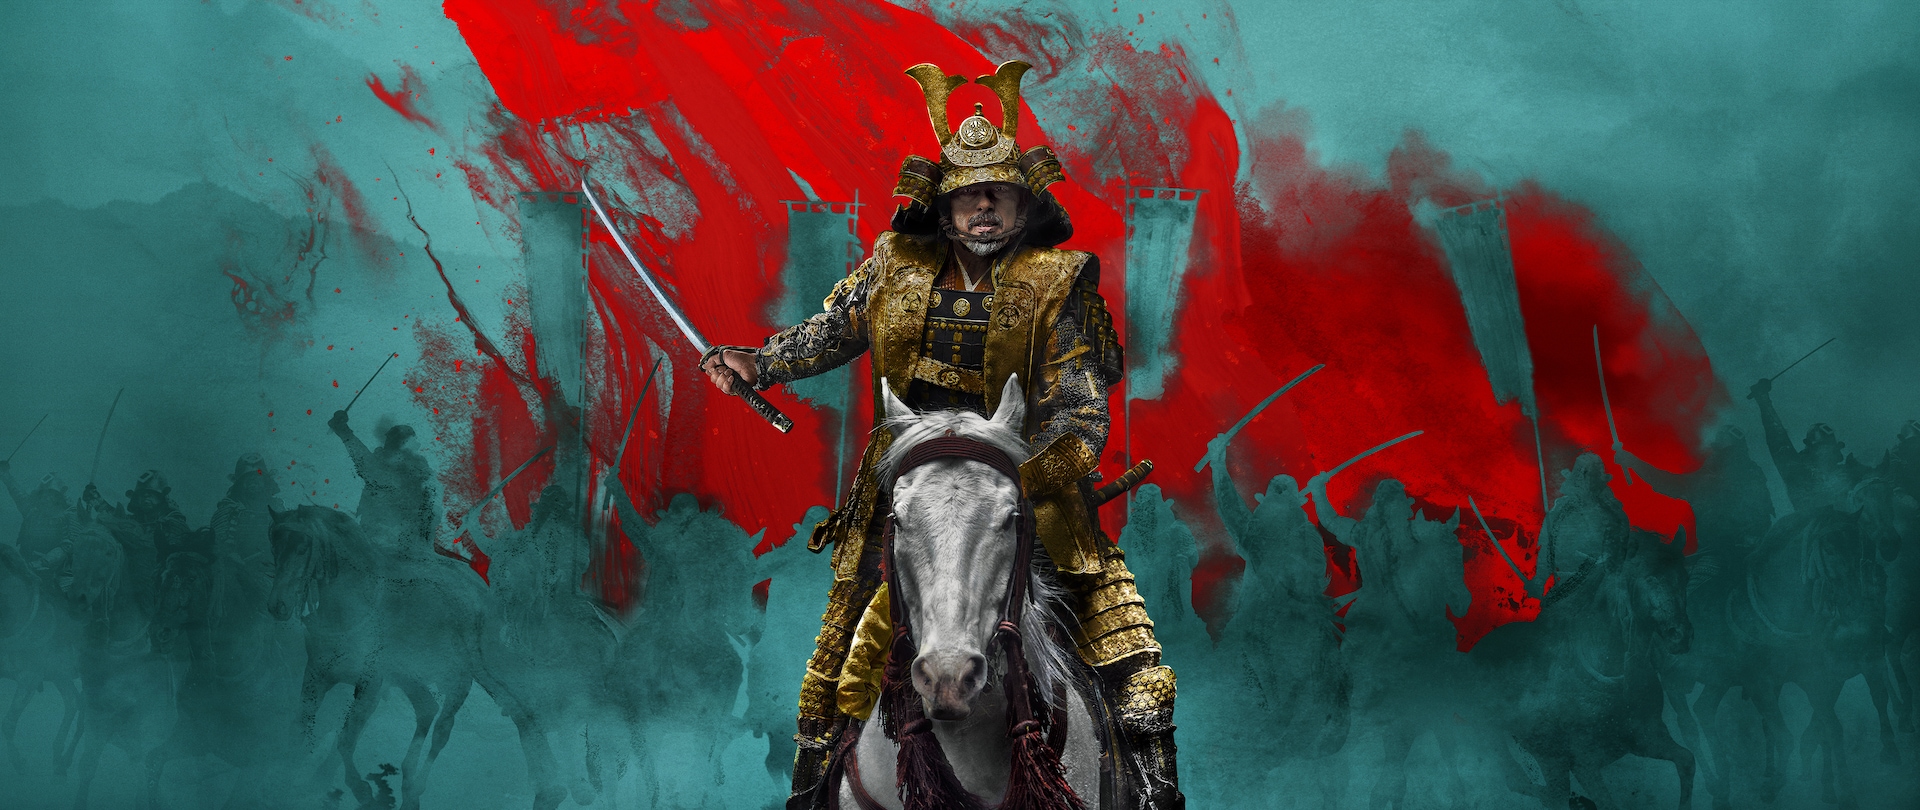 Lord Toranaga dressed in gold ō-yoroi armor riding a white horse with teal-colored silhouetted army and red sky background